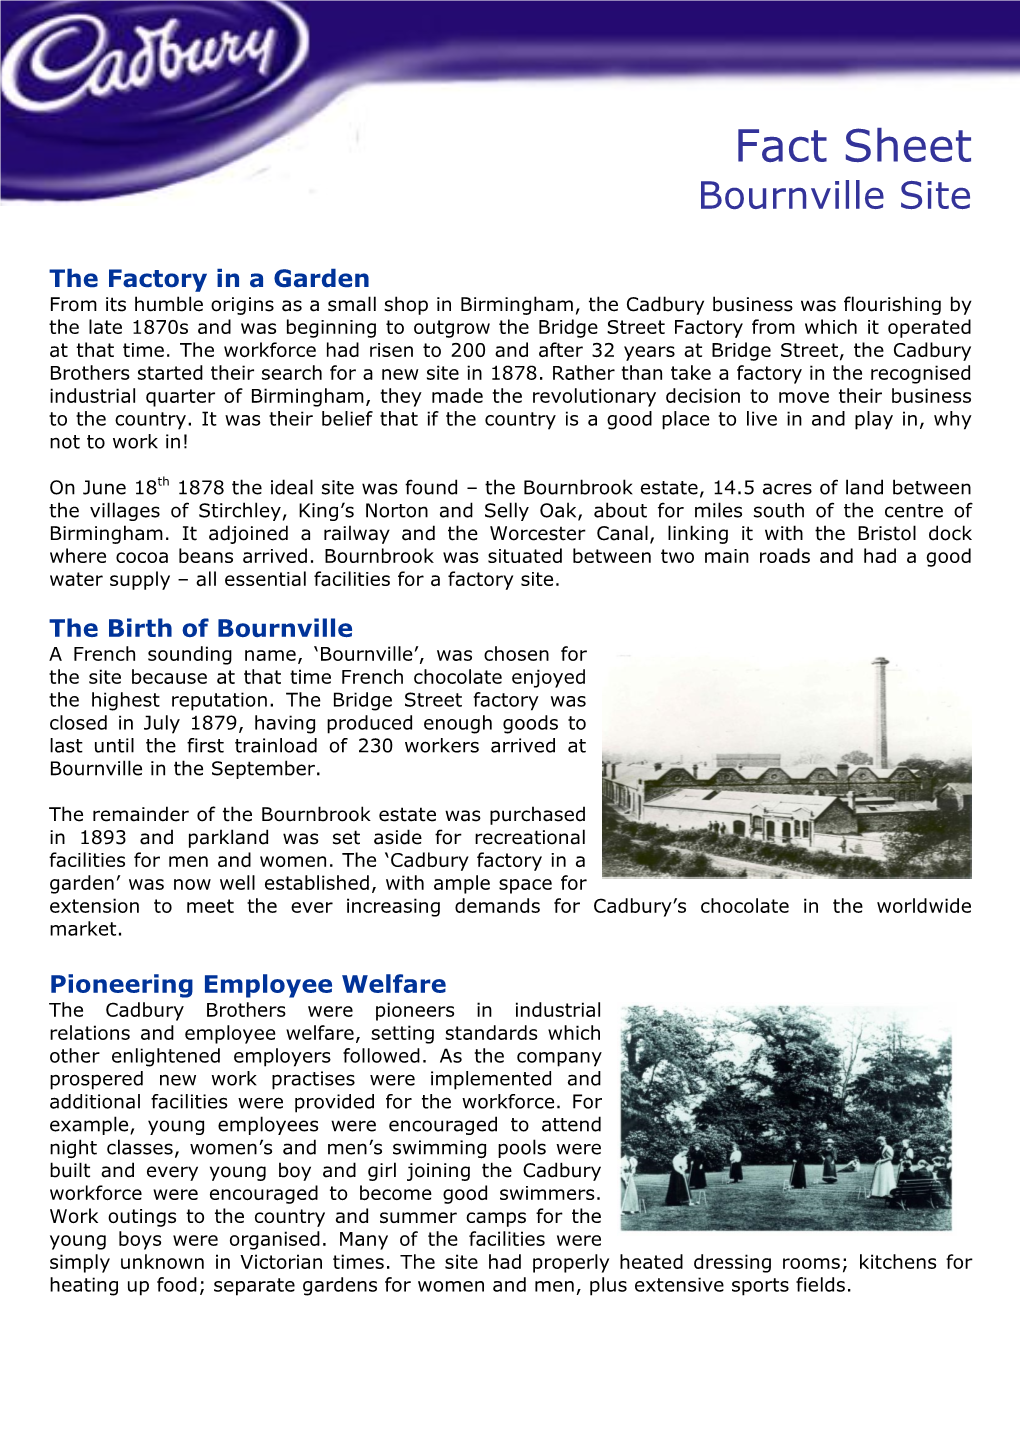 Fact Sheet Bournville Site